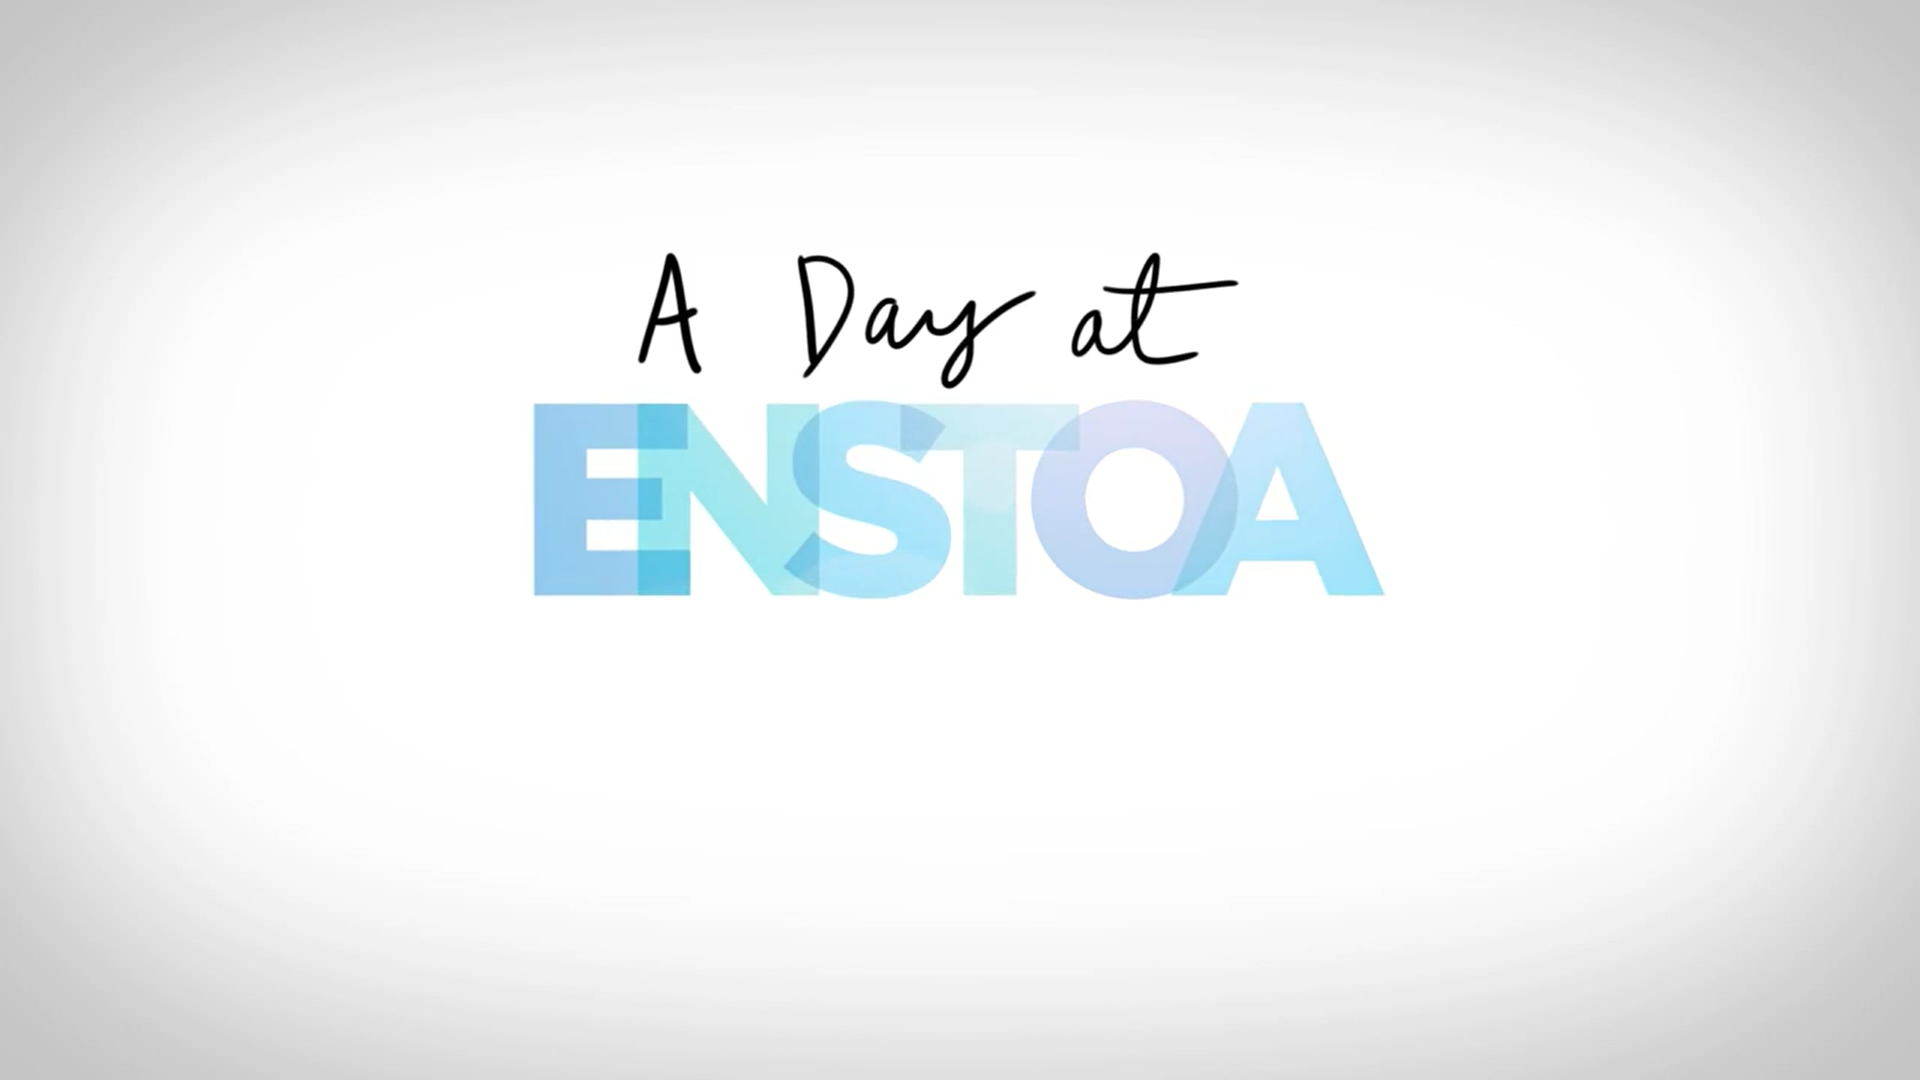 Careers: A Day at Enstoa